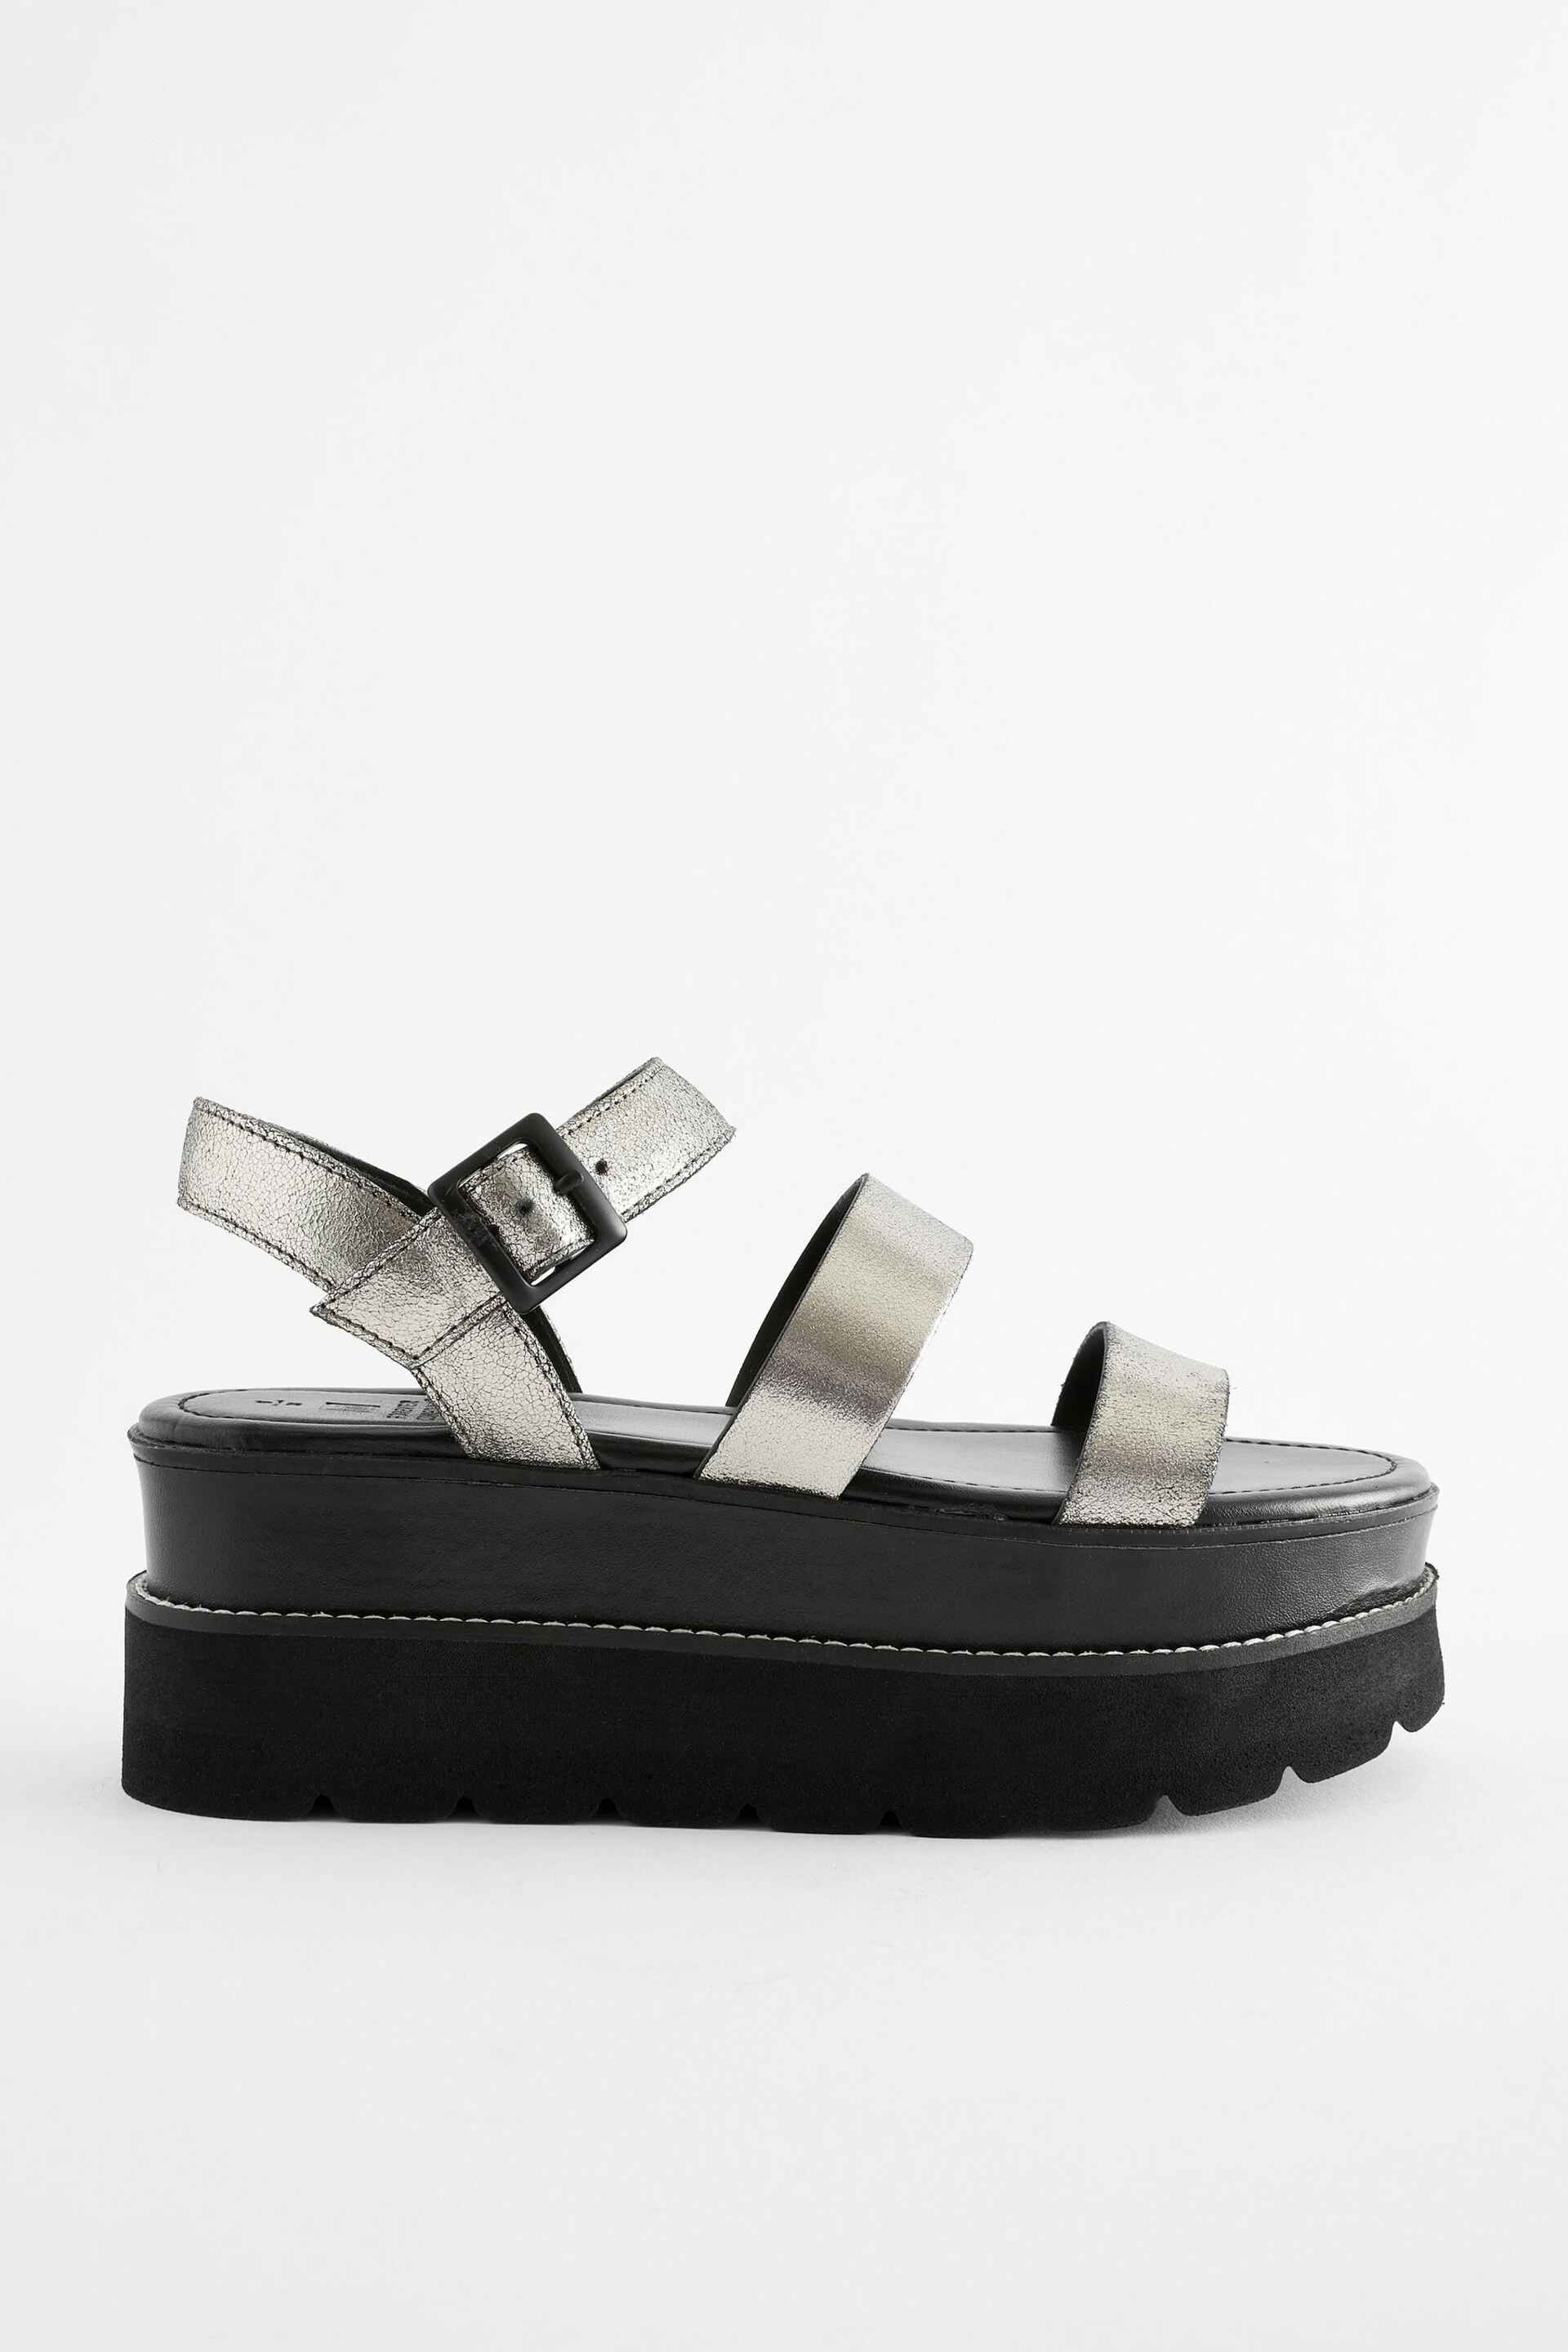 Pewter Forever Comfort® Leather Chunky Flatform Sandals - Image 4 of 8